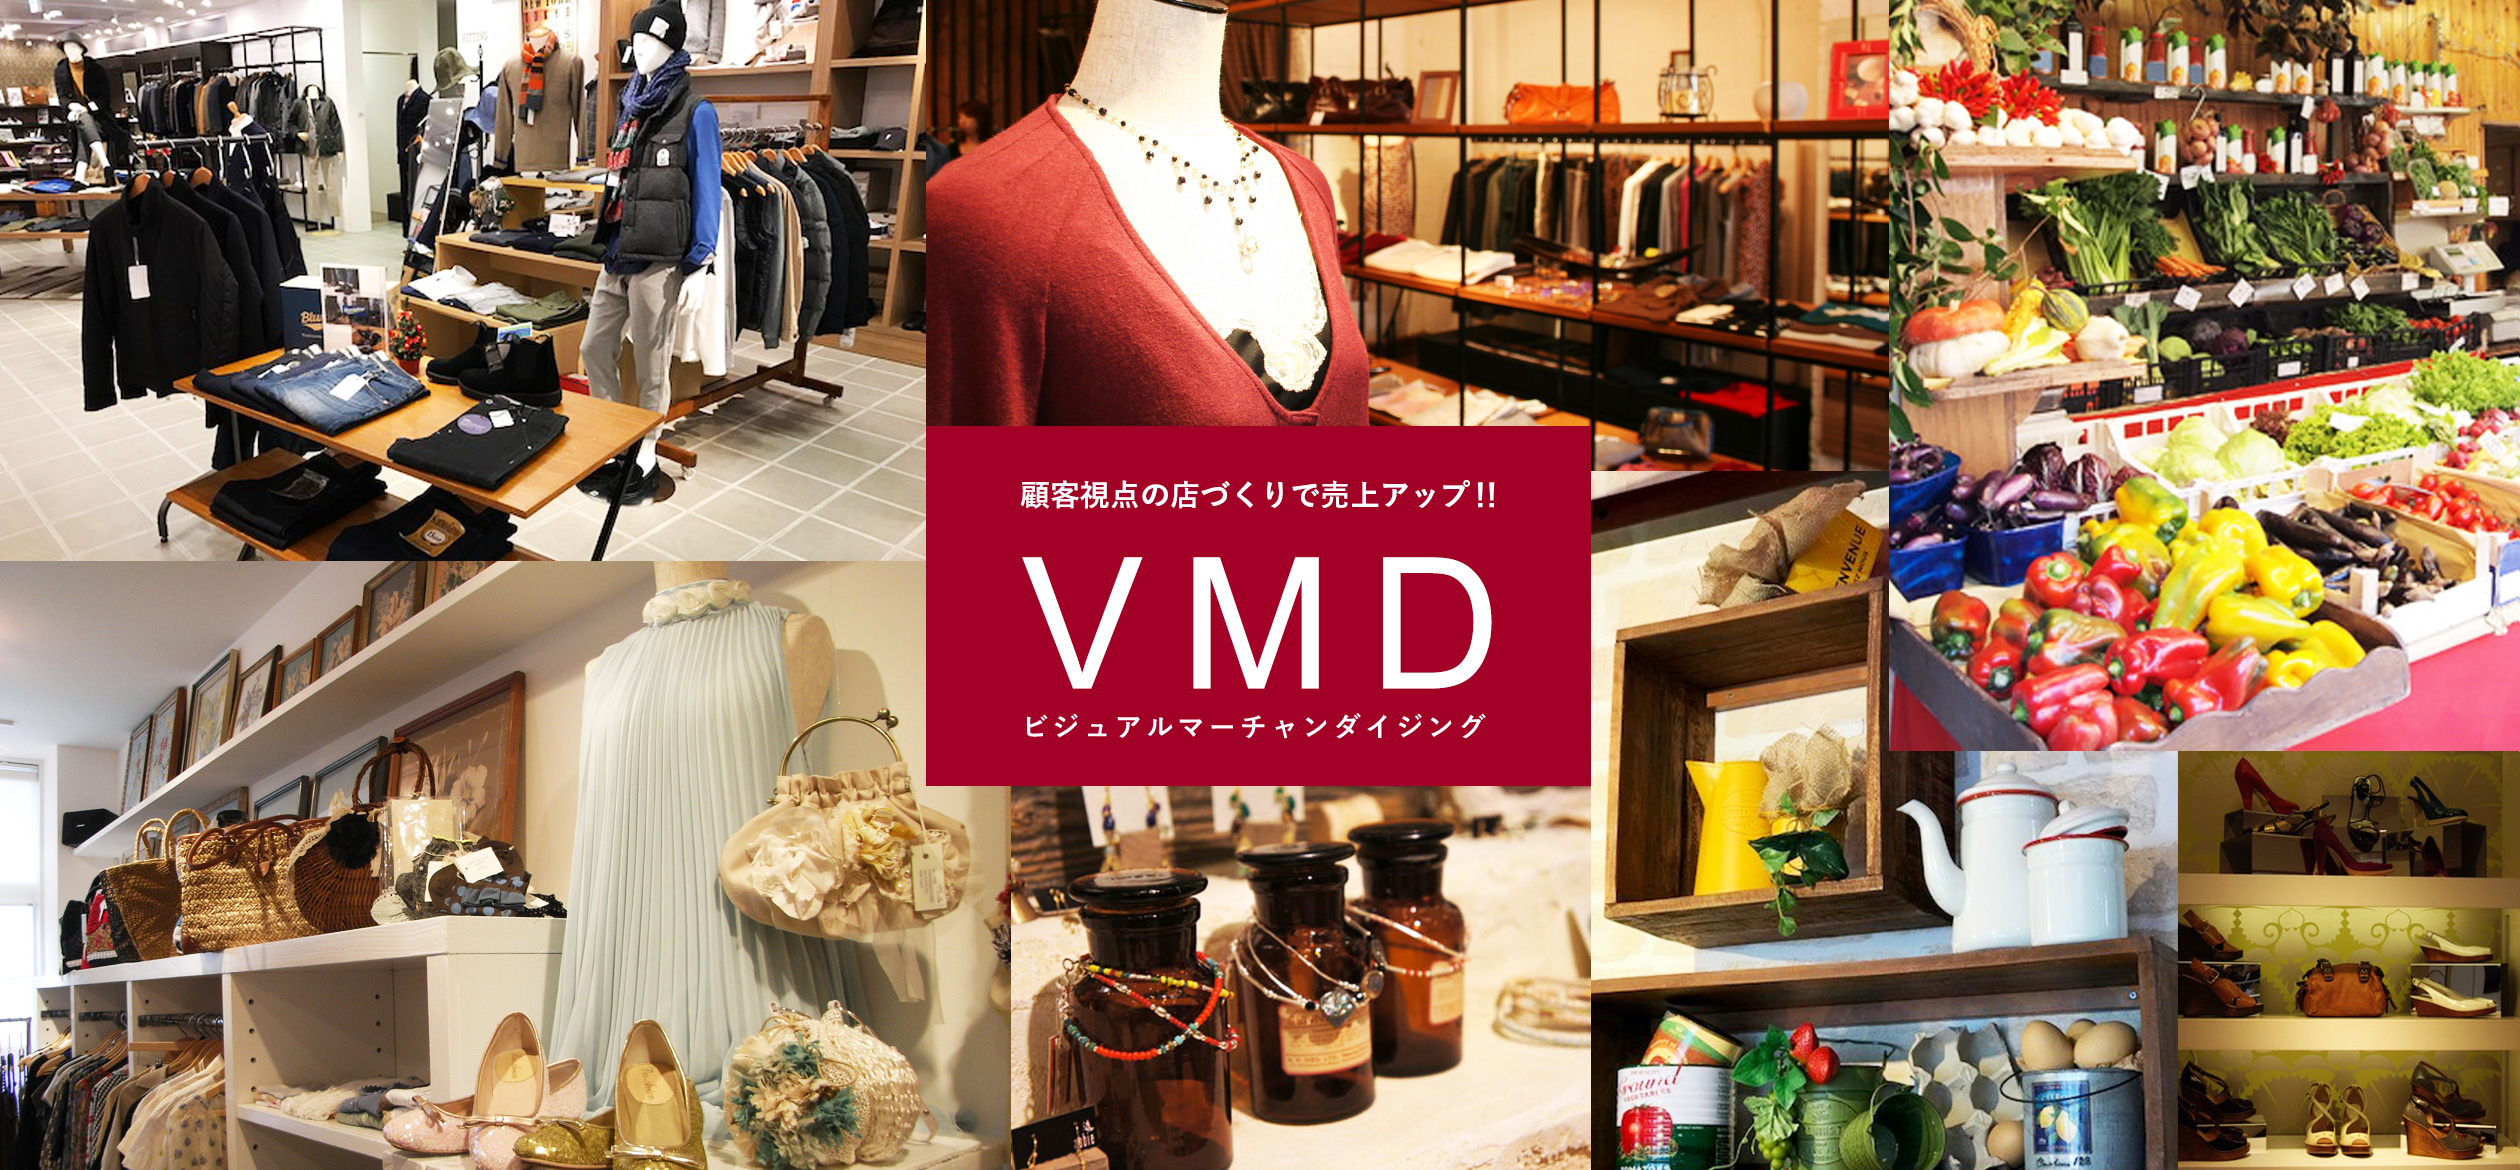 vmd services